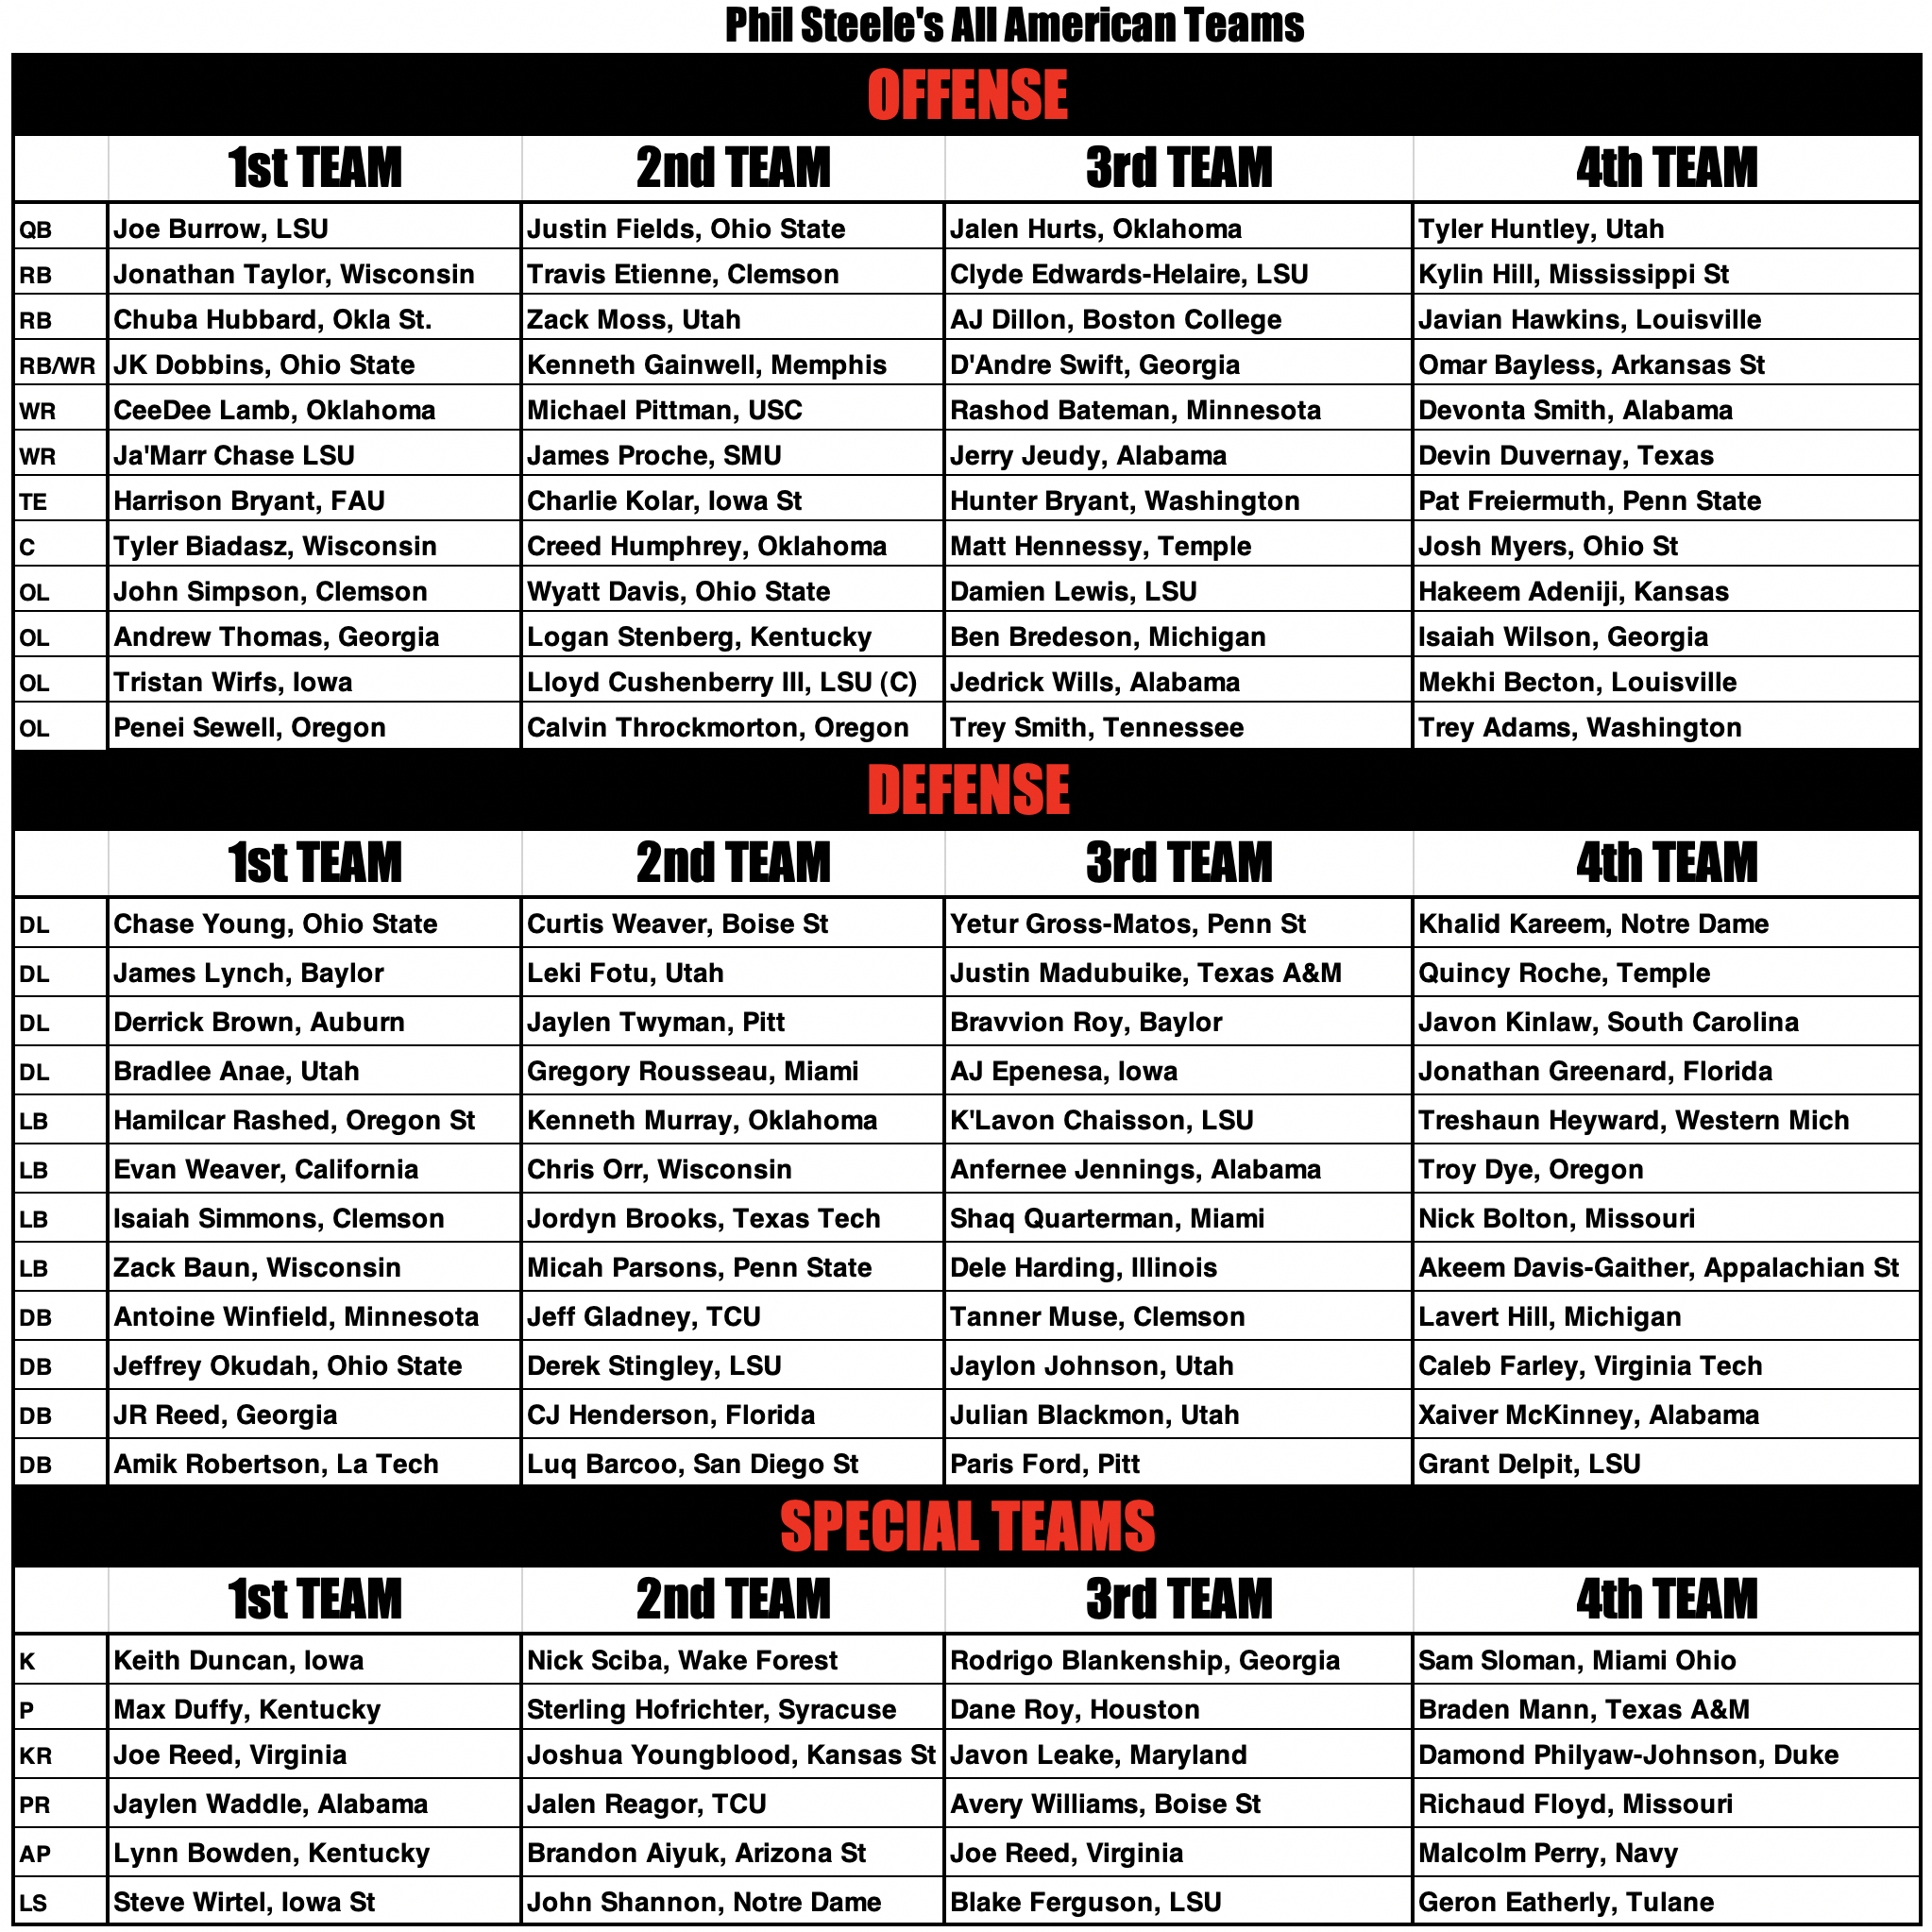 Phil Steele's 2019 Postseason All American and All Conference Teams